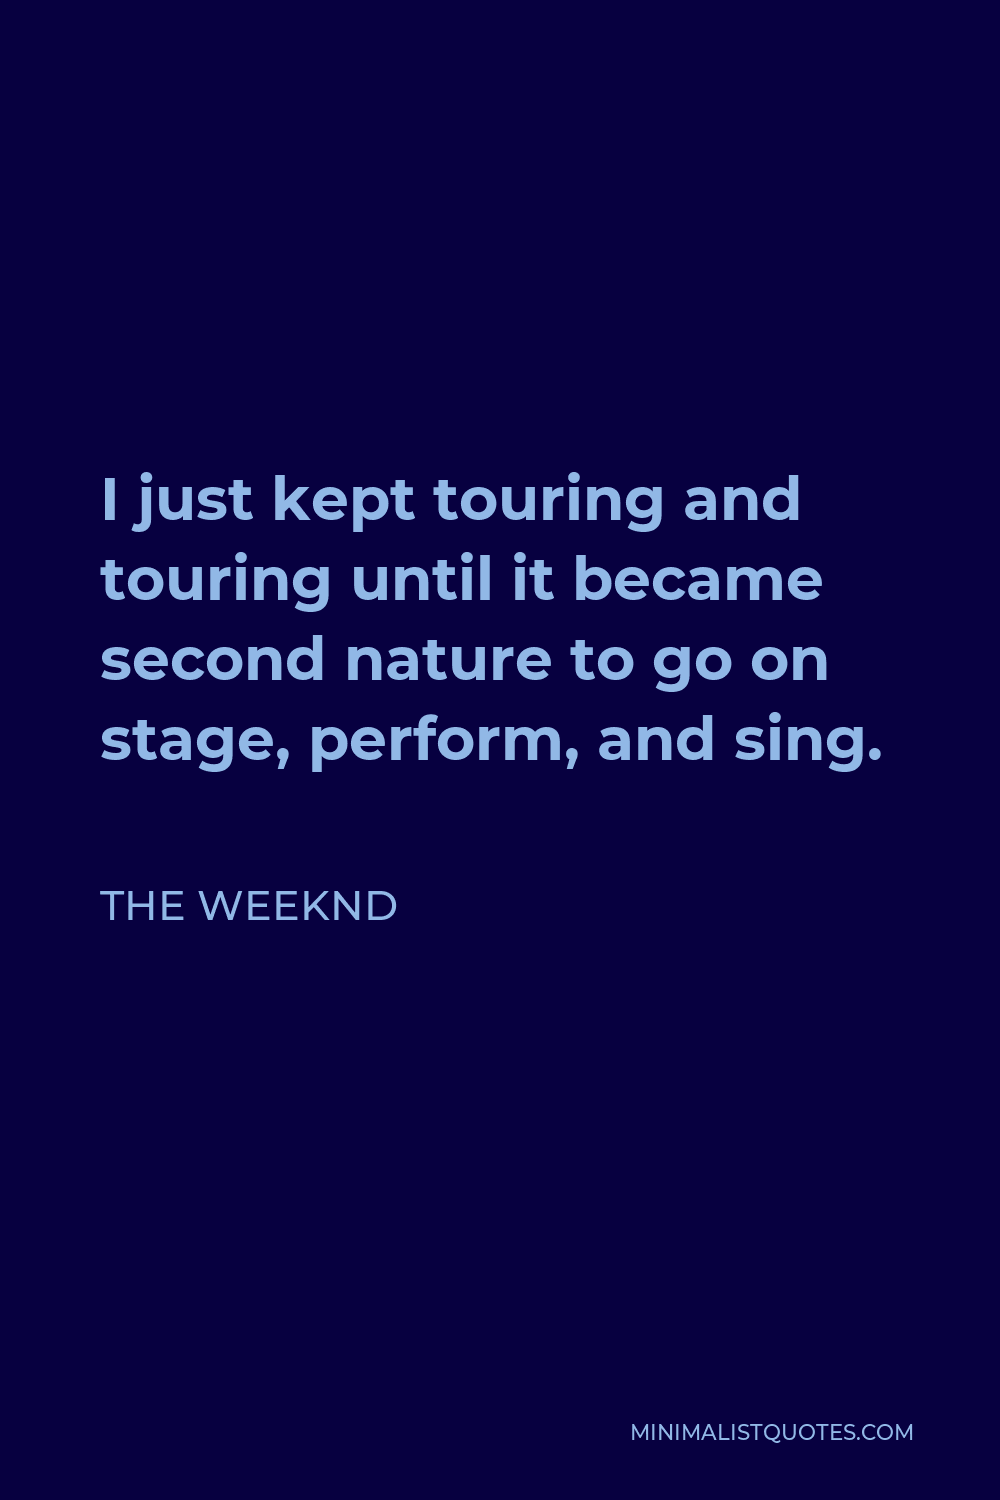 The Weeknd Quote - I just kept touring and touring until it became second nature to go on stage, perform, and sing.